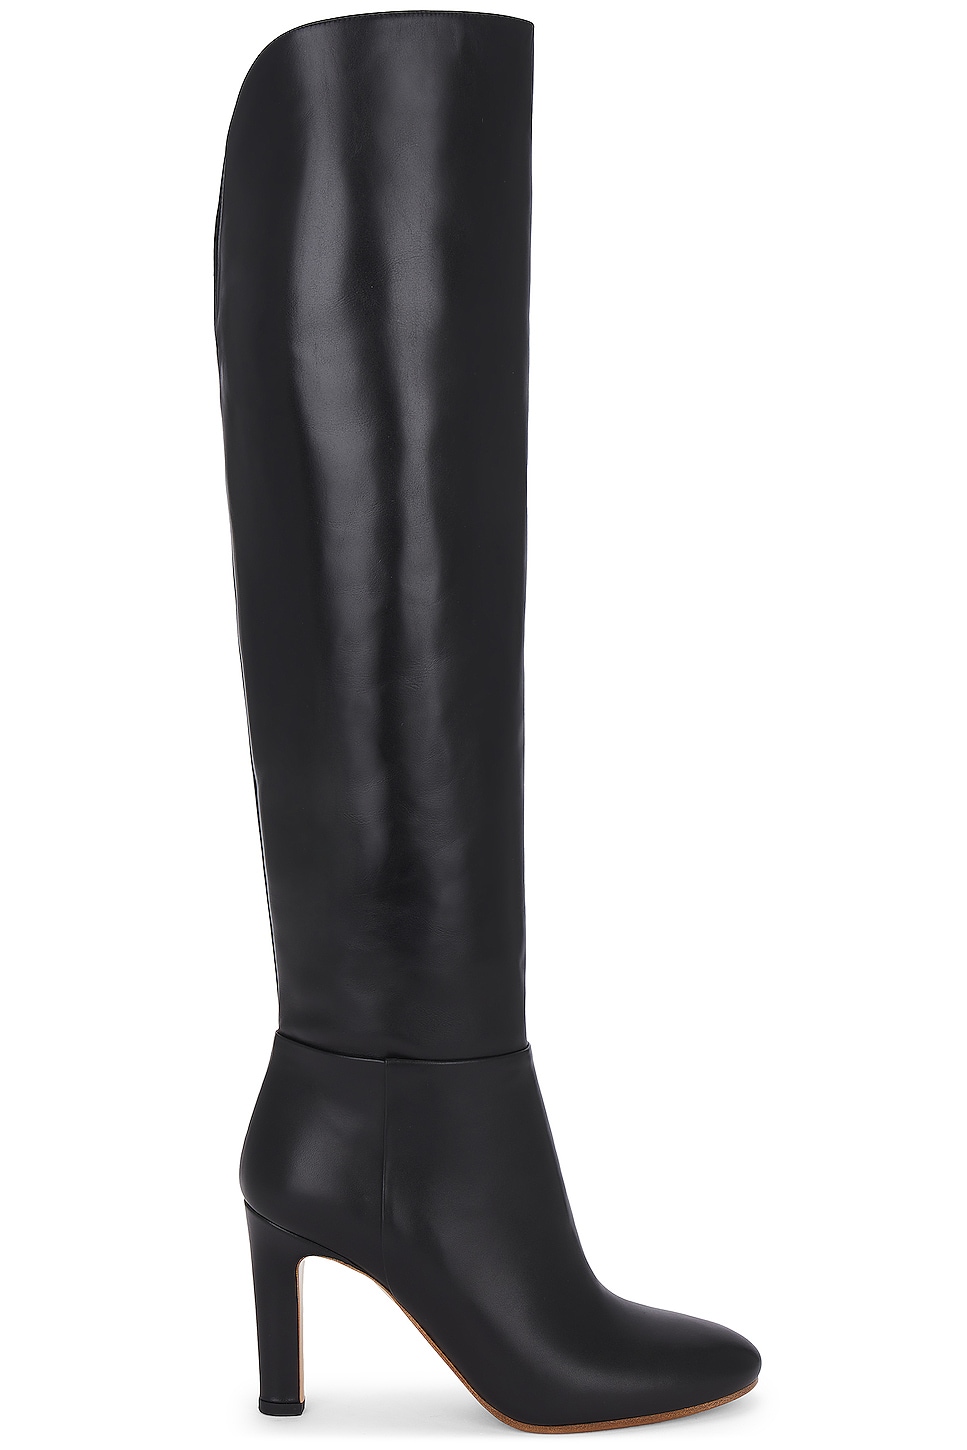 Image 1 of Gabriela Hearst Linda Over The Knee Boot in Black